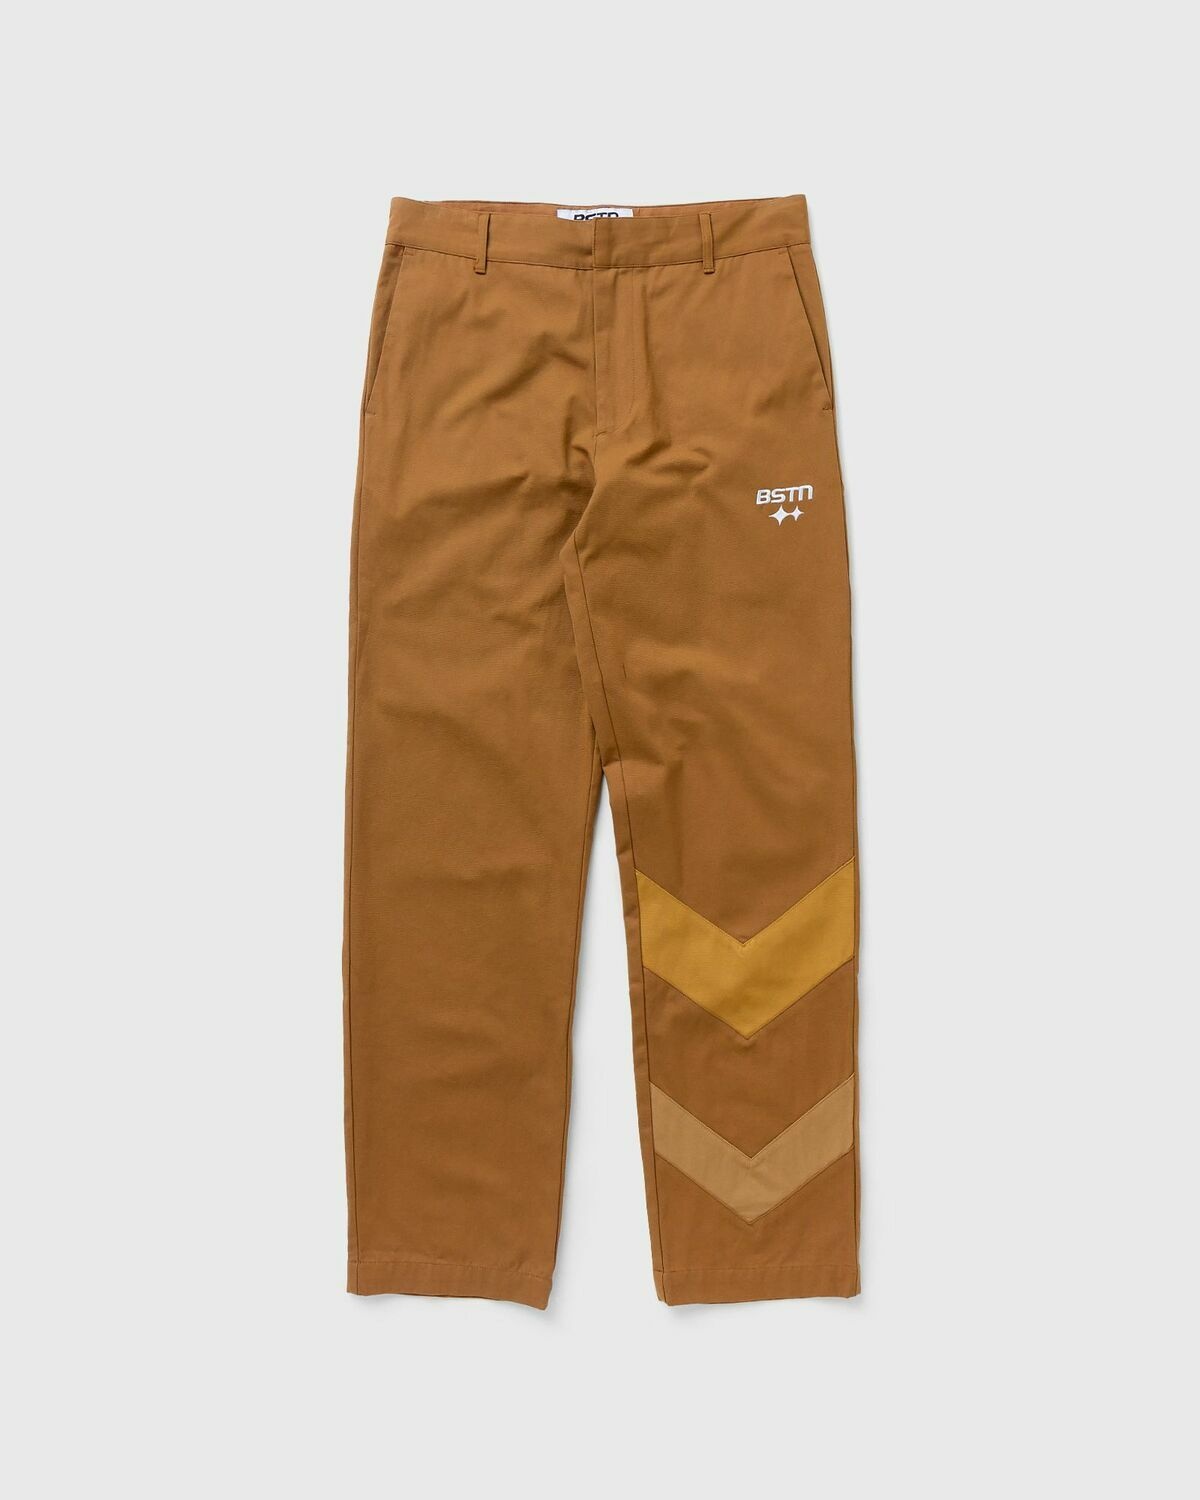 Bstn Brand Workwear Warm Up Pants Brown - Mens - Casual Pants